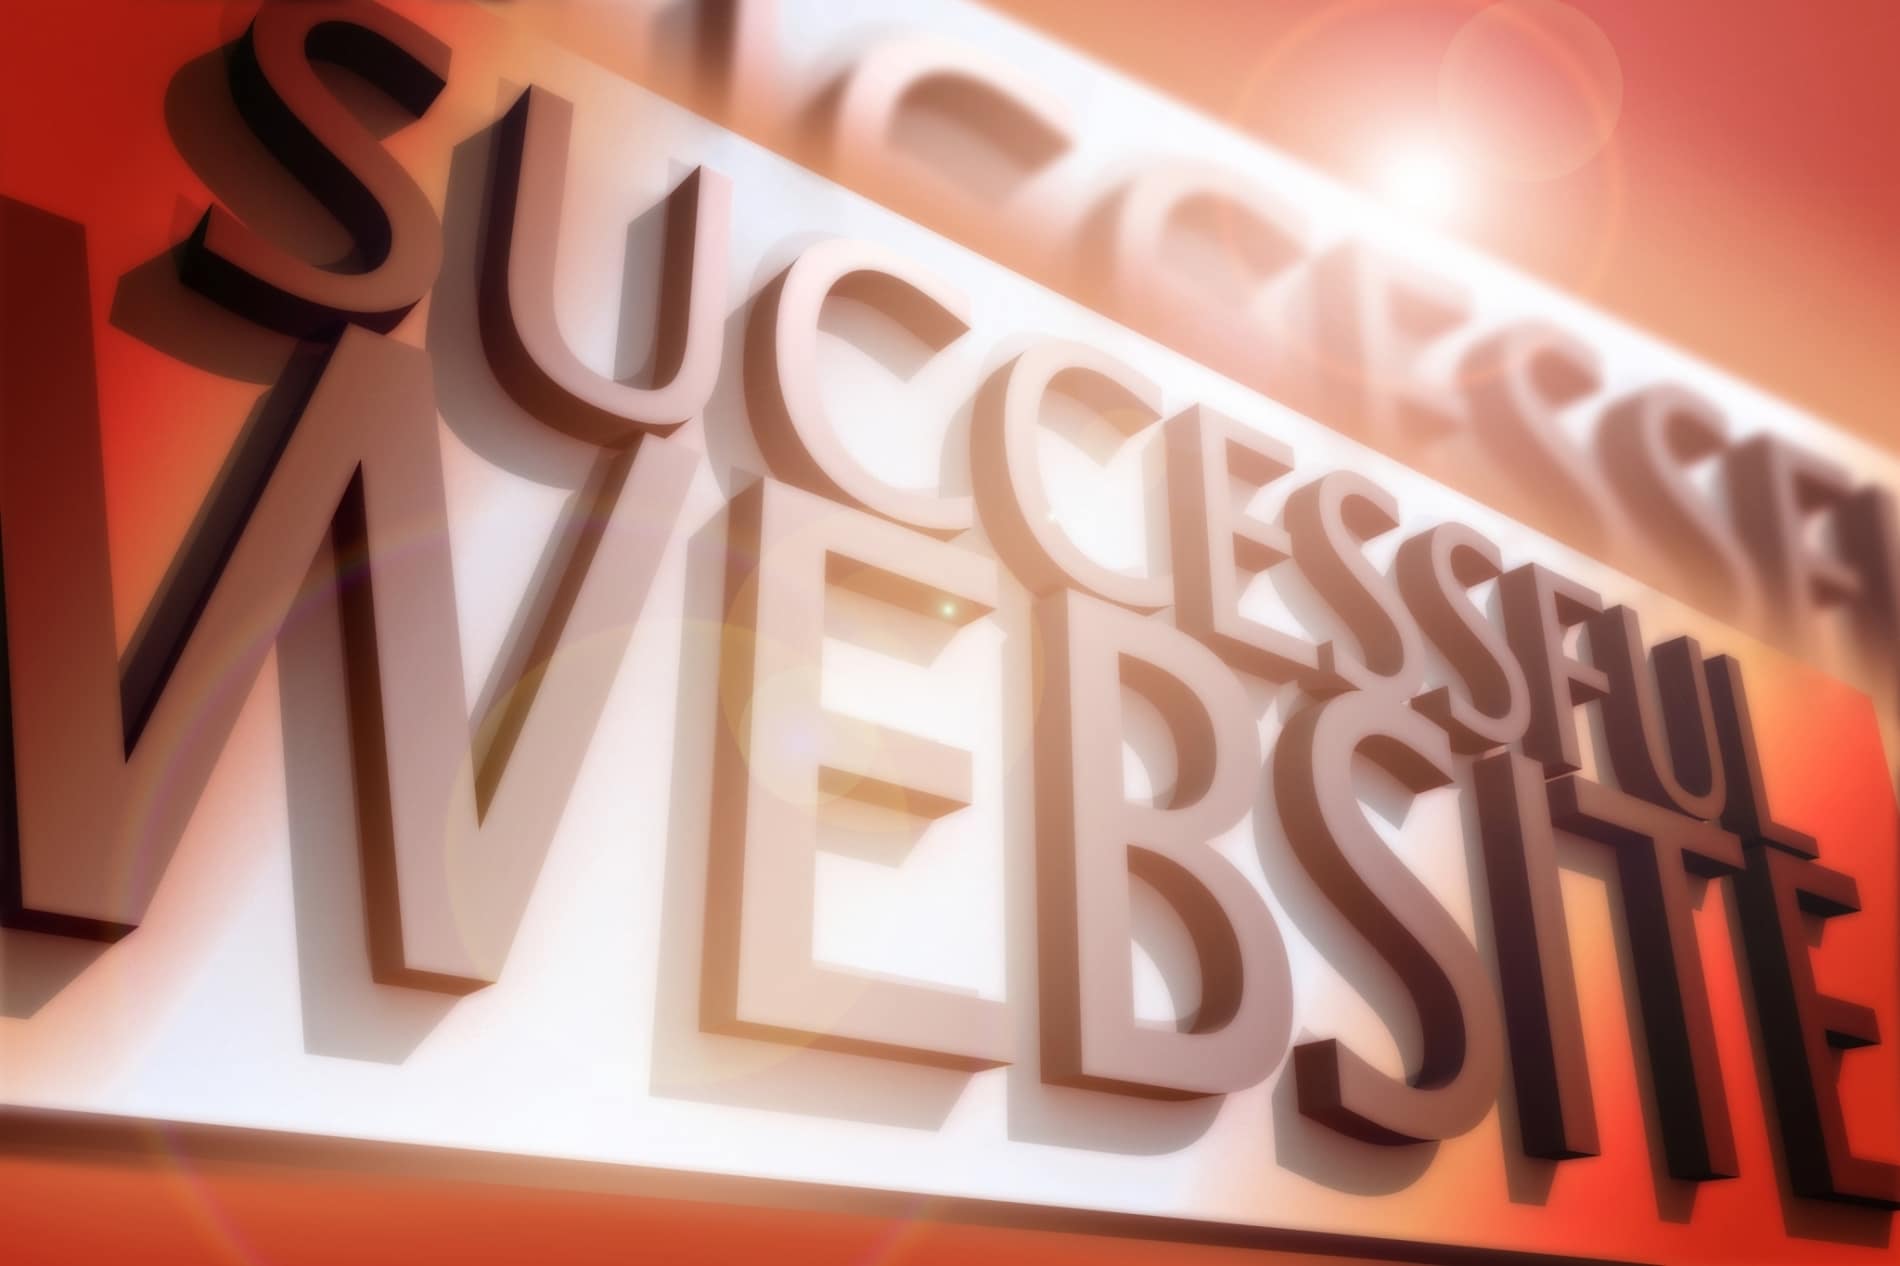 Website 101 for Home Businesses